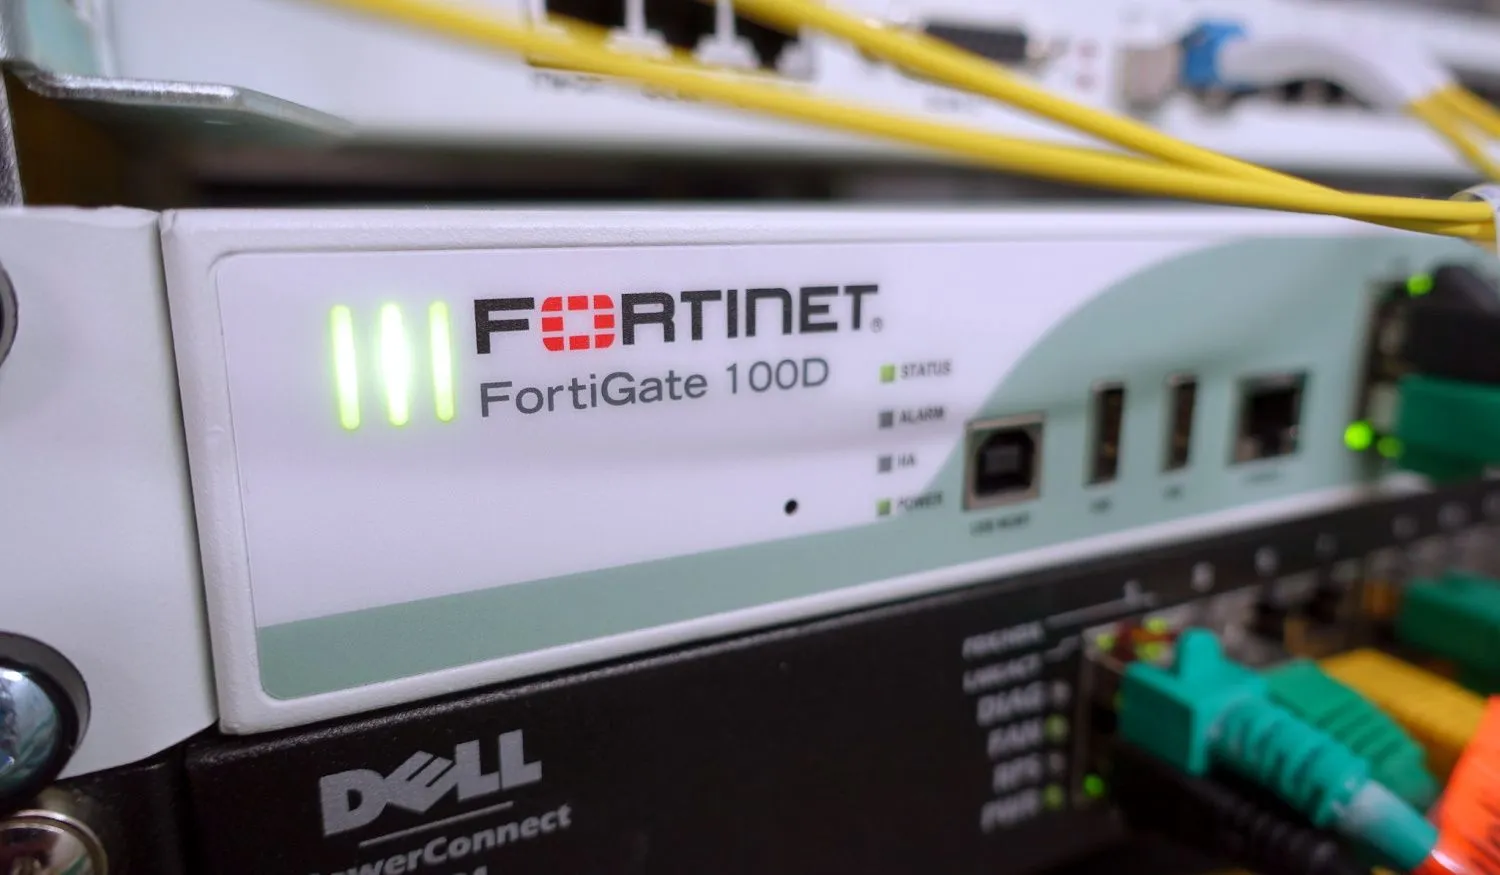 Nearly 70% of FortiGate Firewalls are vulnerable to new bug, experts say - threcord.media(cybercrime)